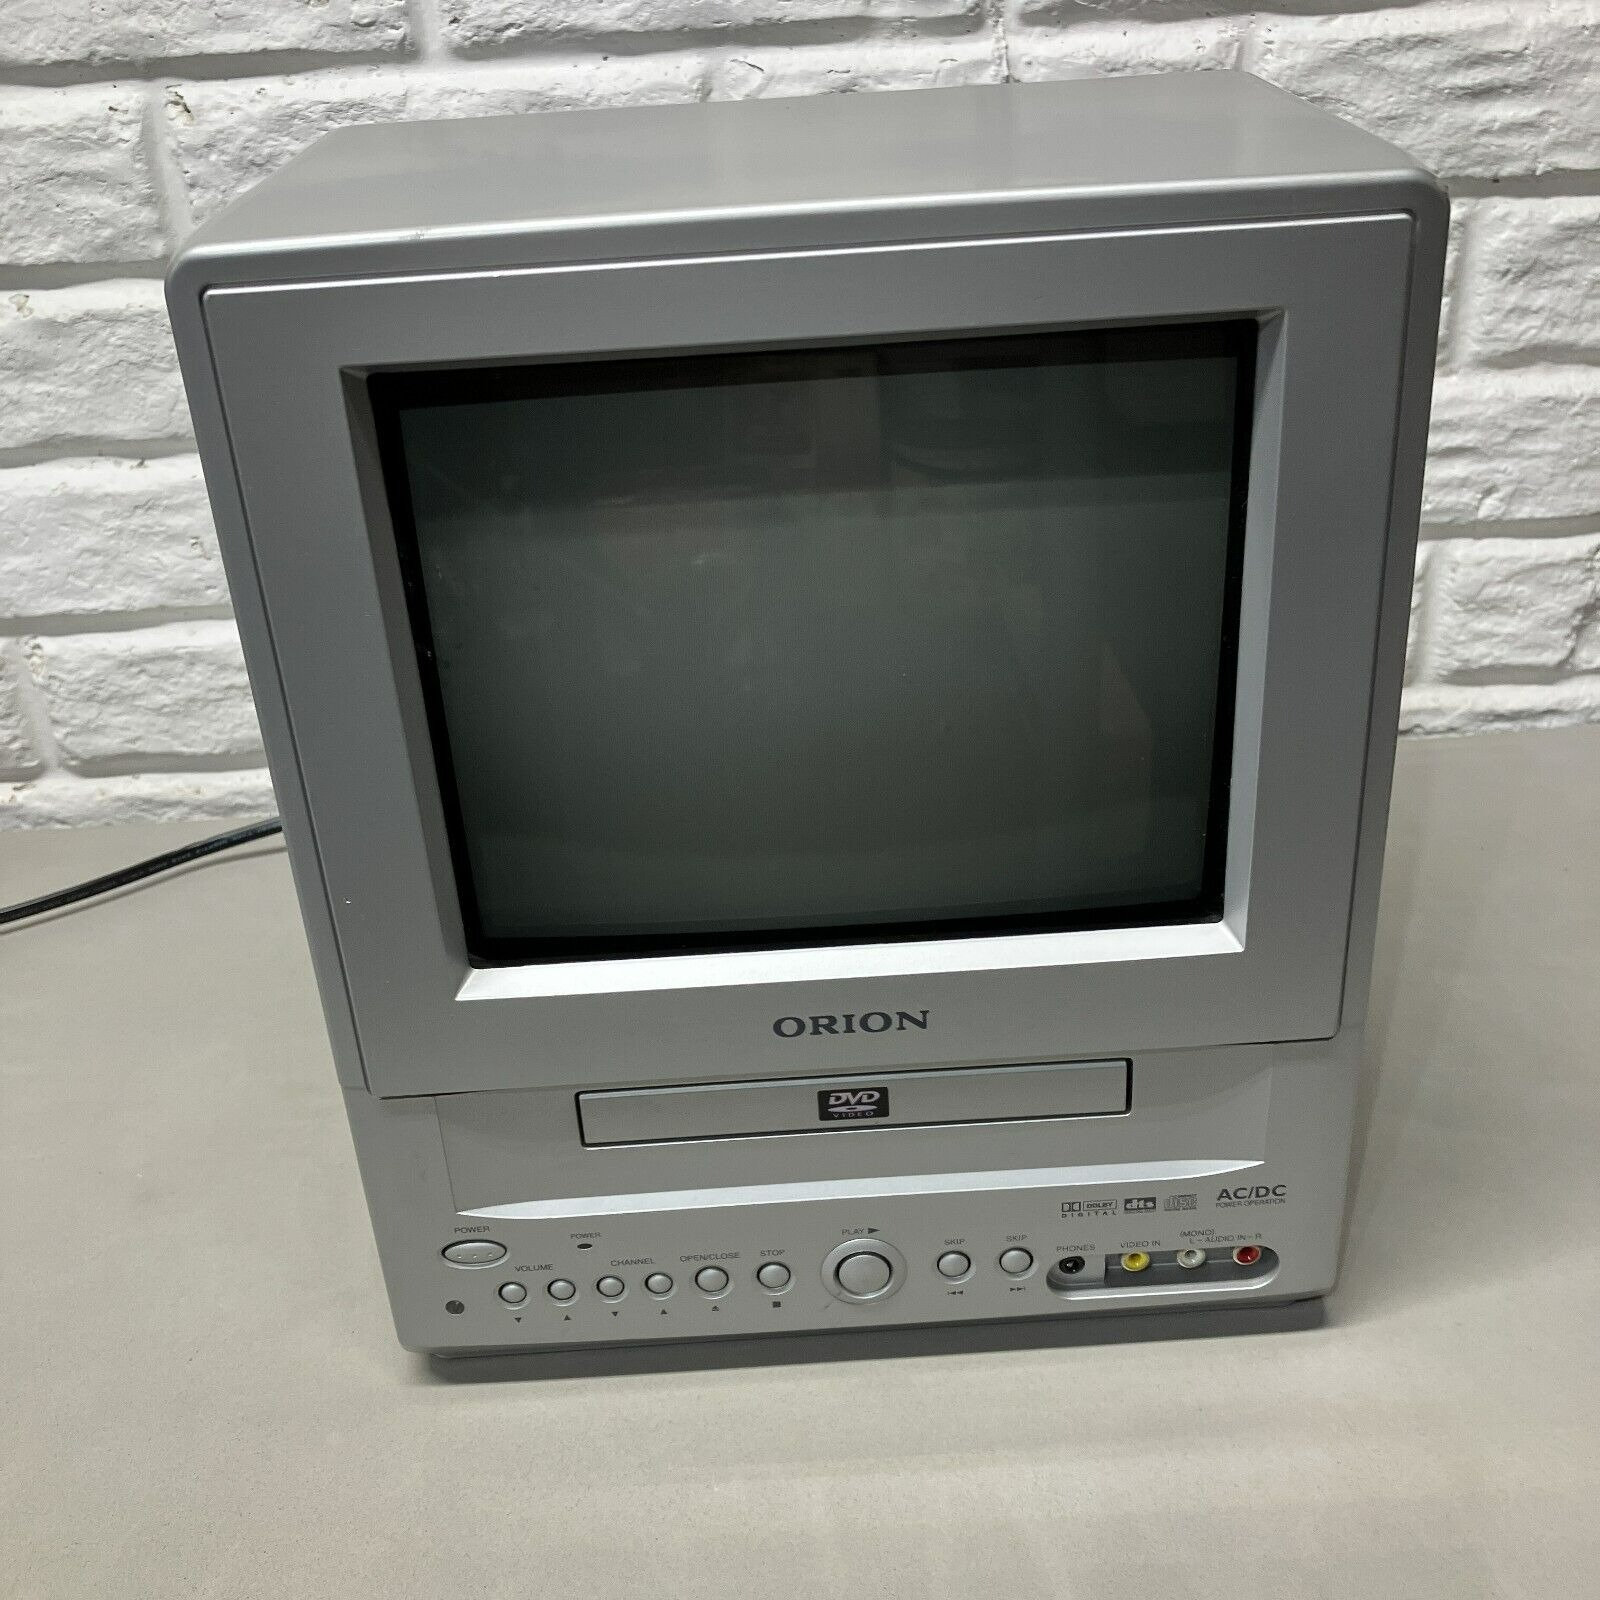 ORION Retro Gaming Stereo TV/DVD Combo TVDVD093B Camping